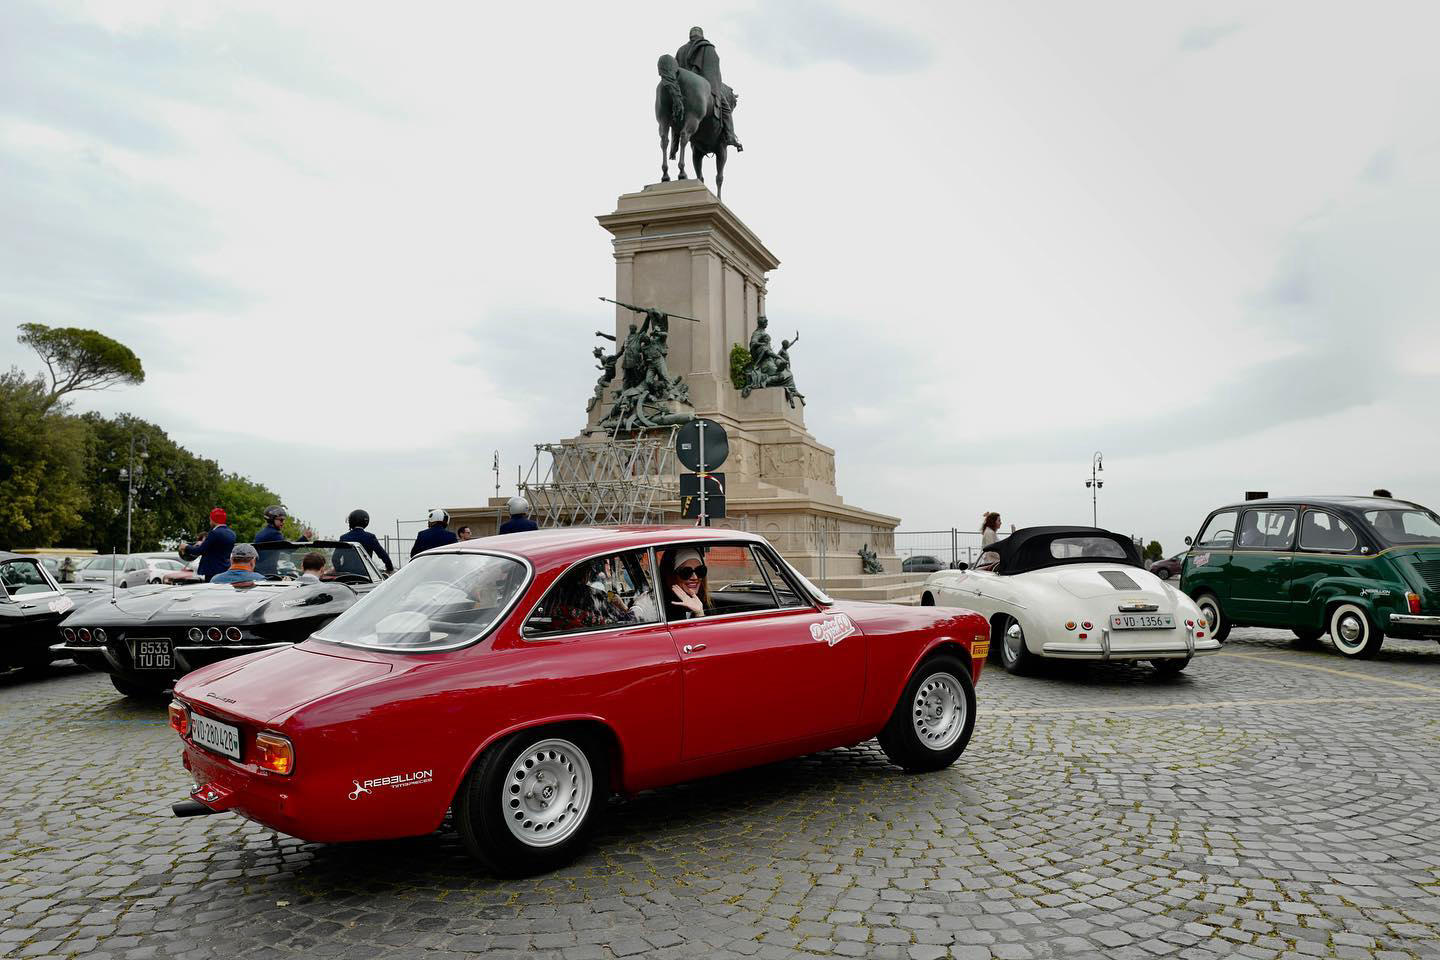 image  1 Petrolicious - The sweet life—la dolce vita—of the 1960s isn’t limited to the past